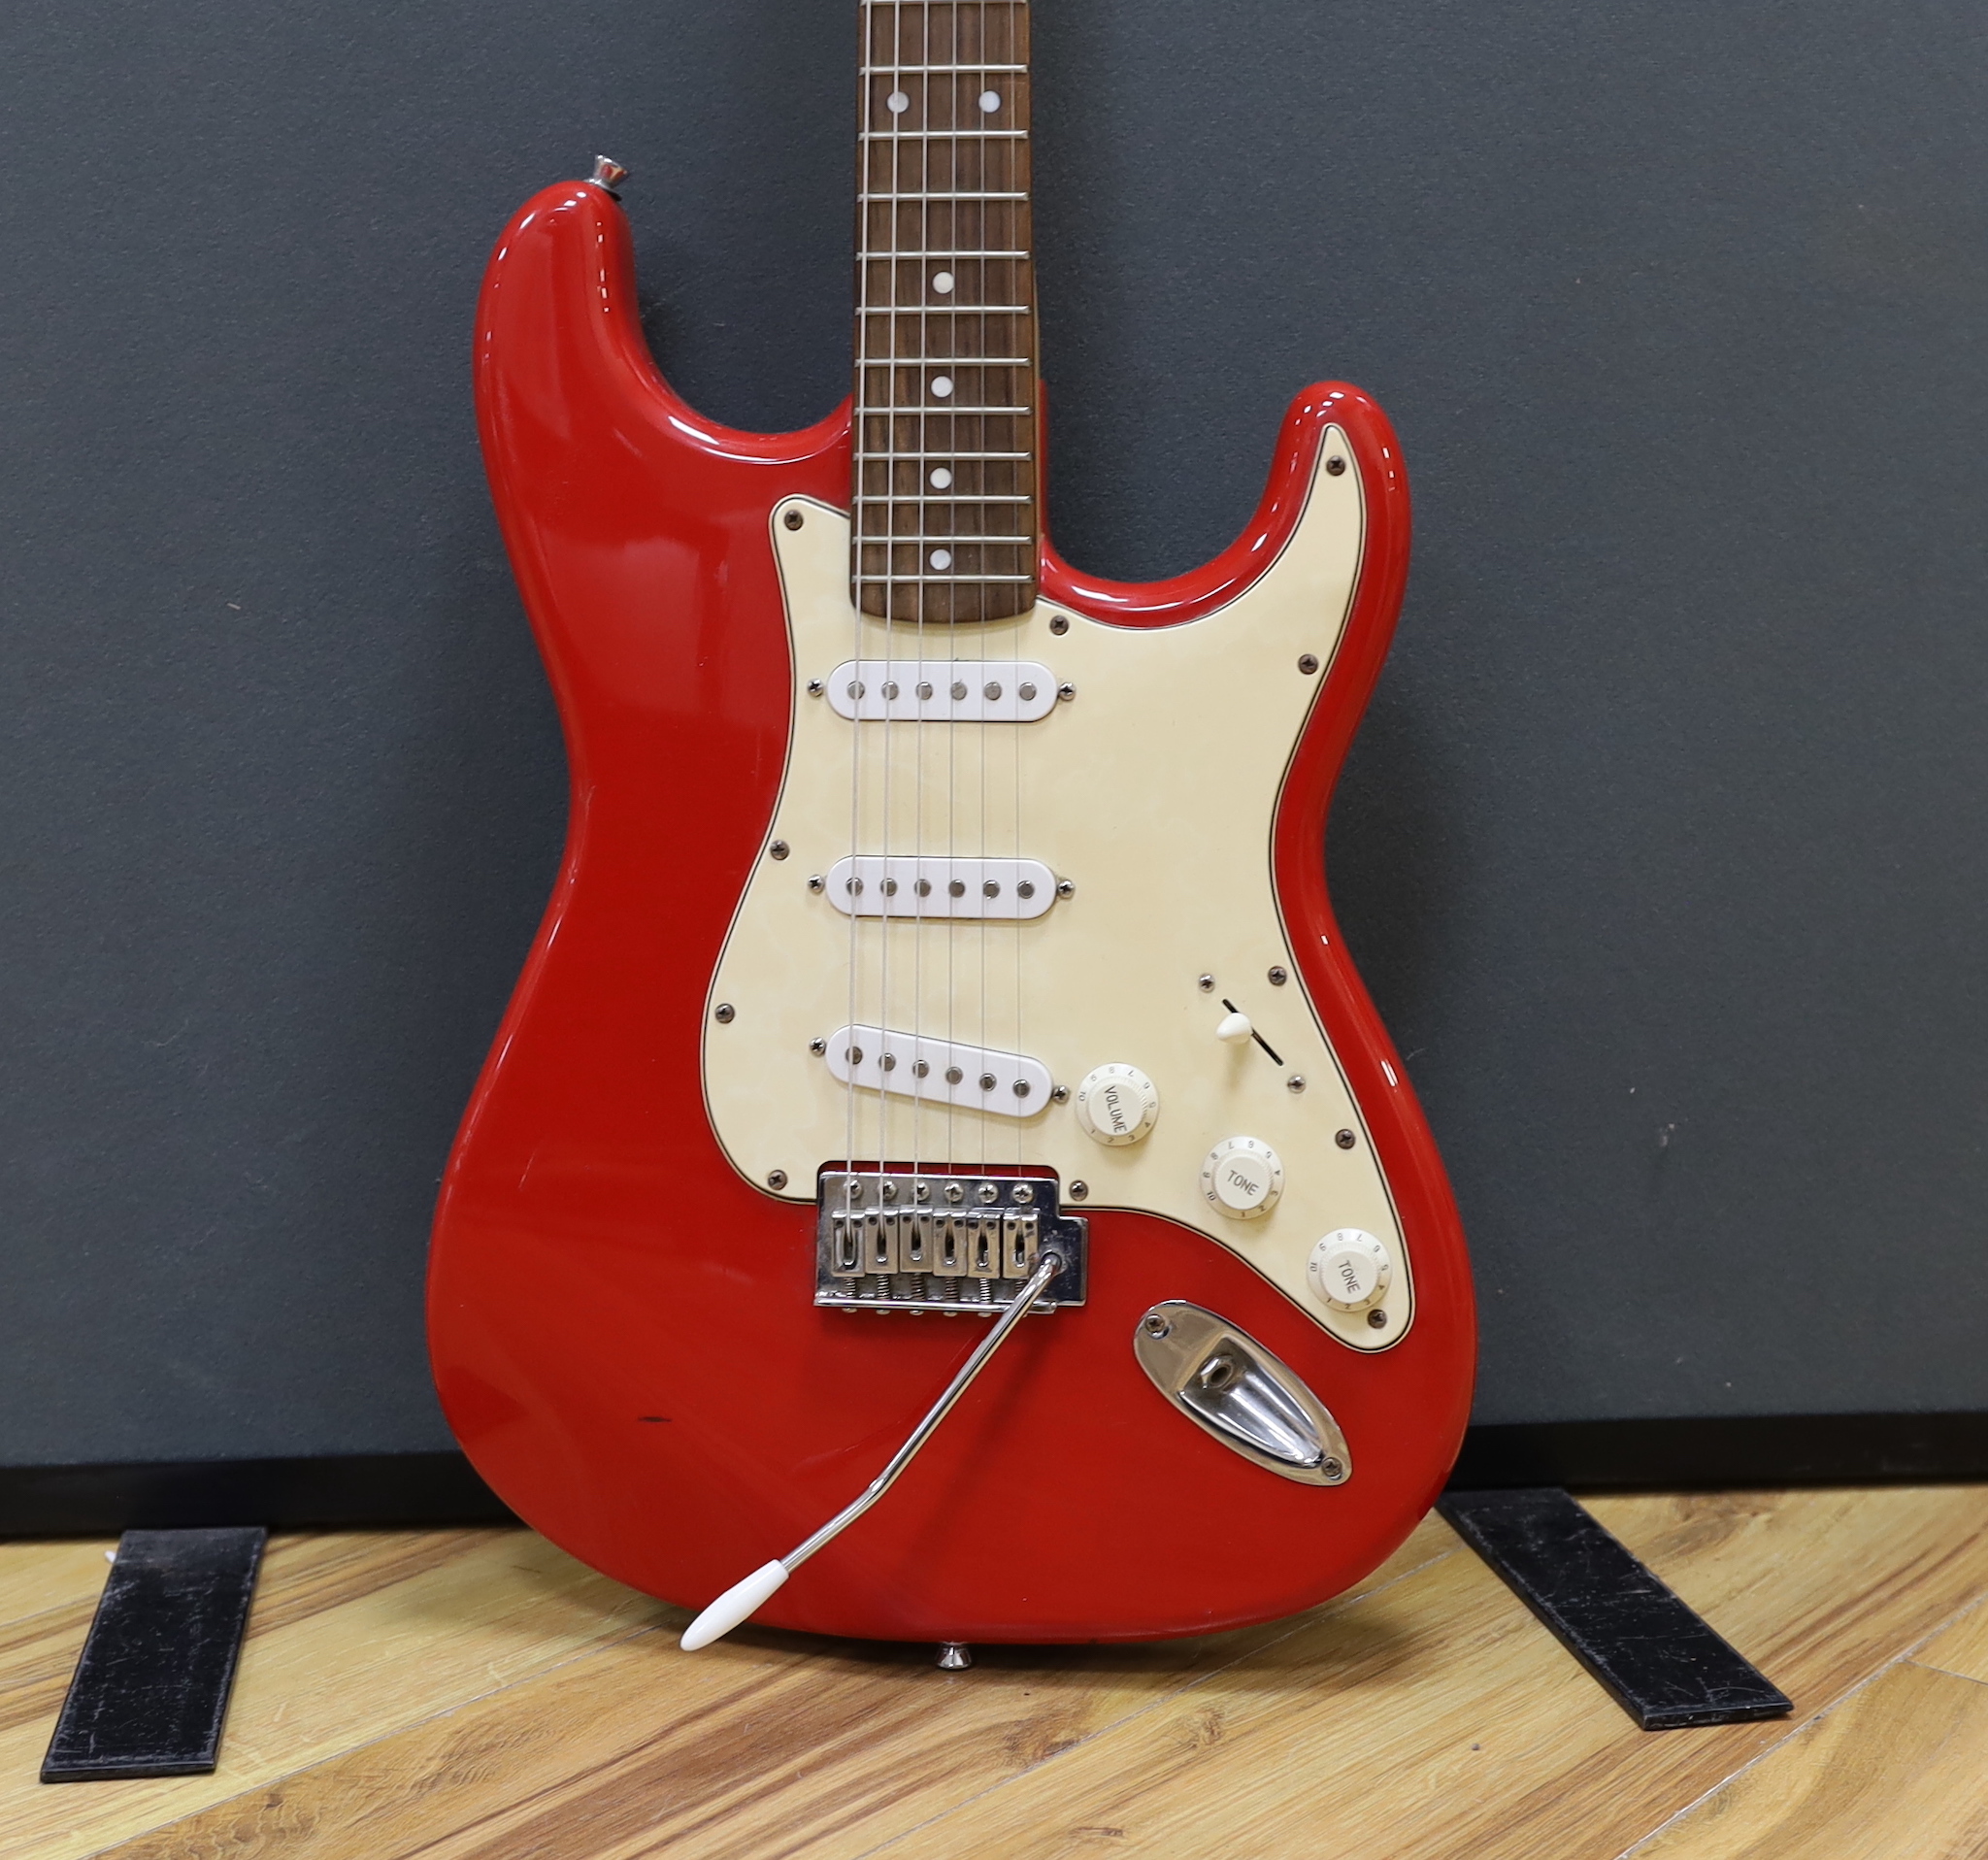 A Squier Strat by Fender electric guitar with rosewood neck and red lacquer body